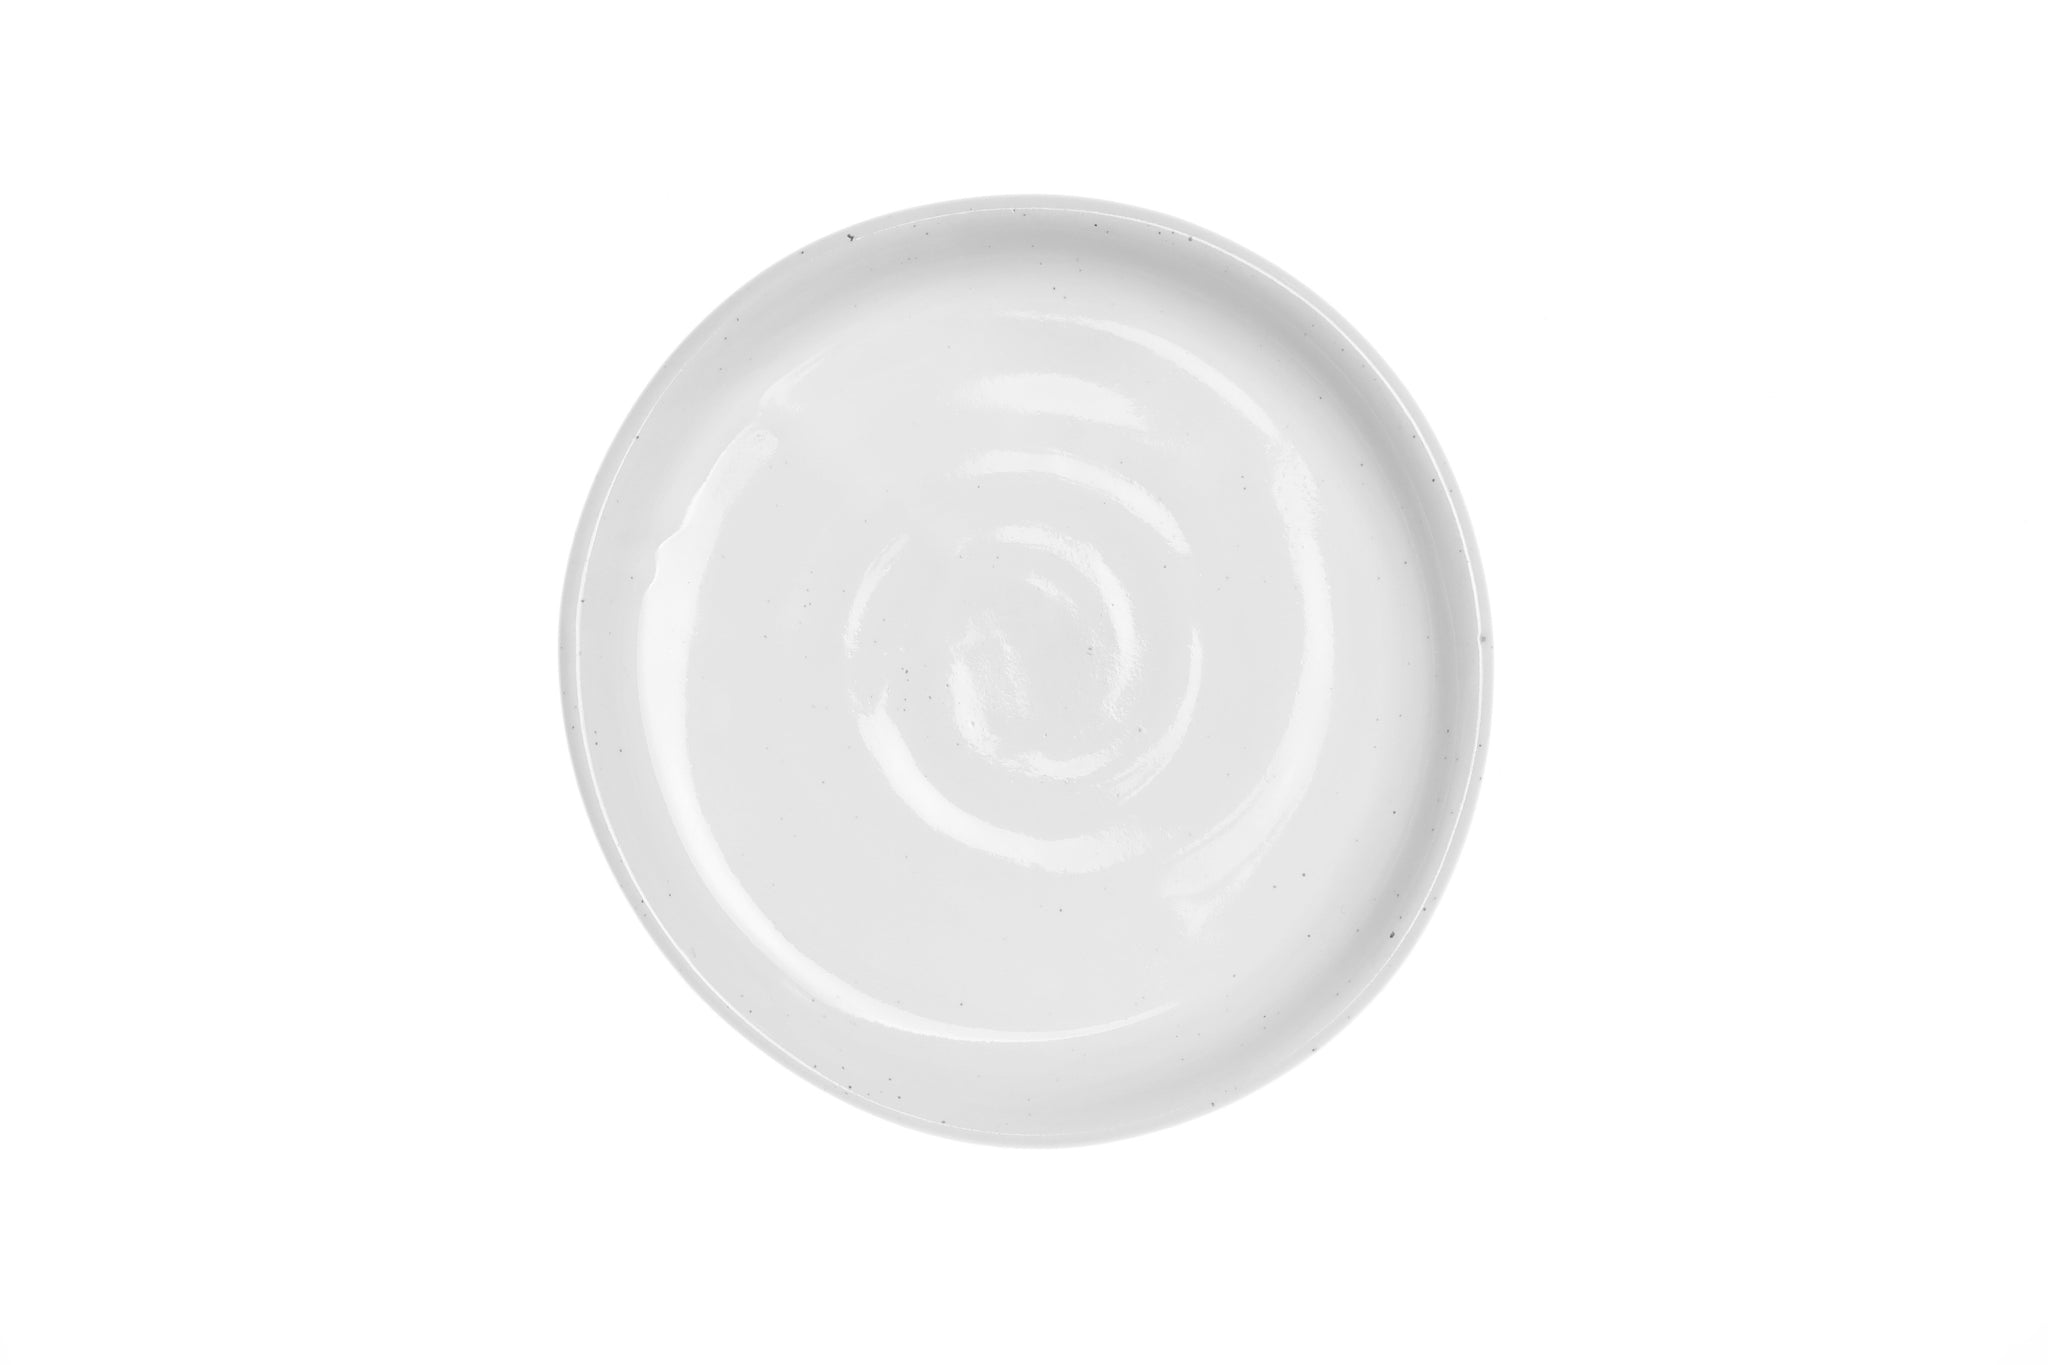 Earth 16cm Bread Plate - Alabaster (4 Pack)